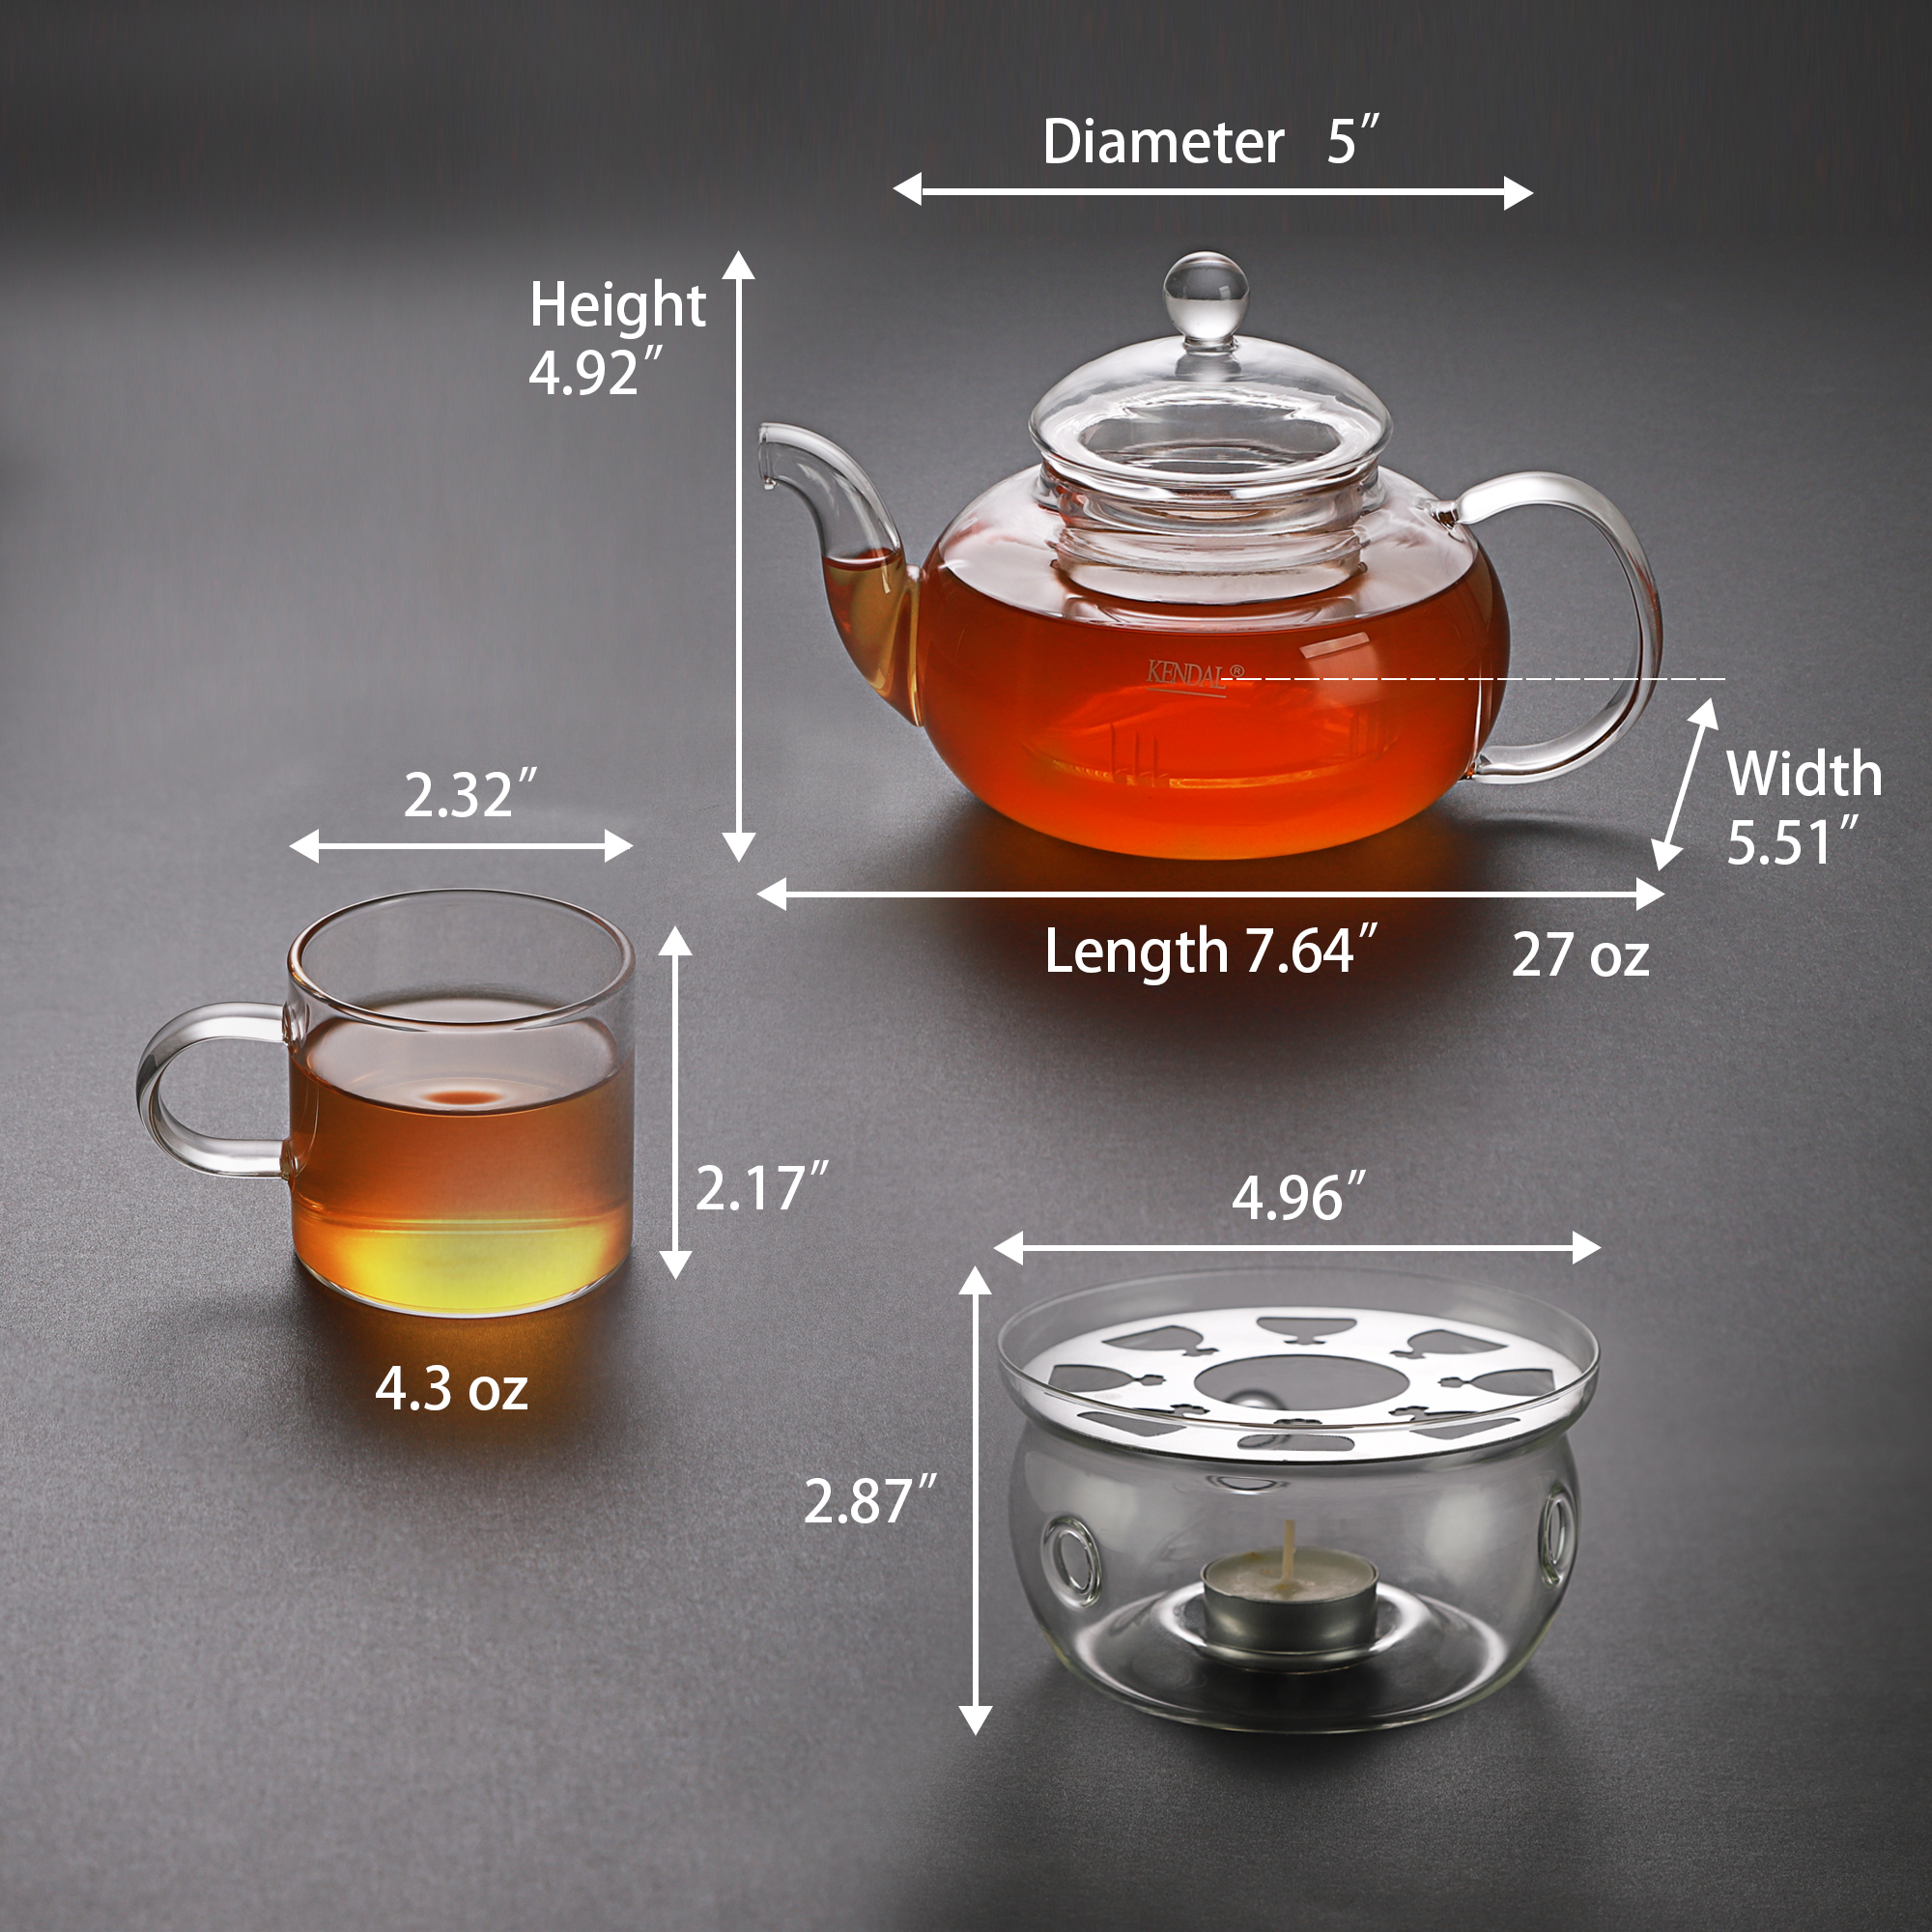 27 oz glass filtering tea maker teapot with a warmer and 6 tea cups CJ-BS808A - image 3 of 8